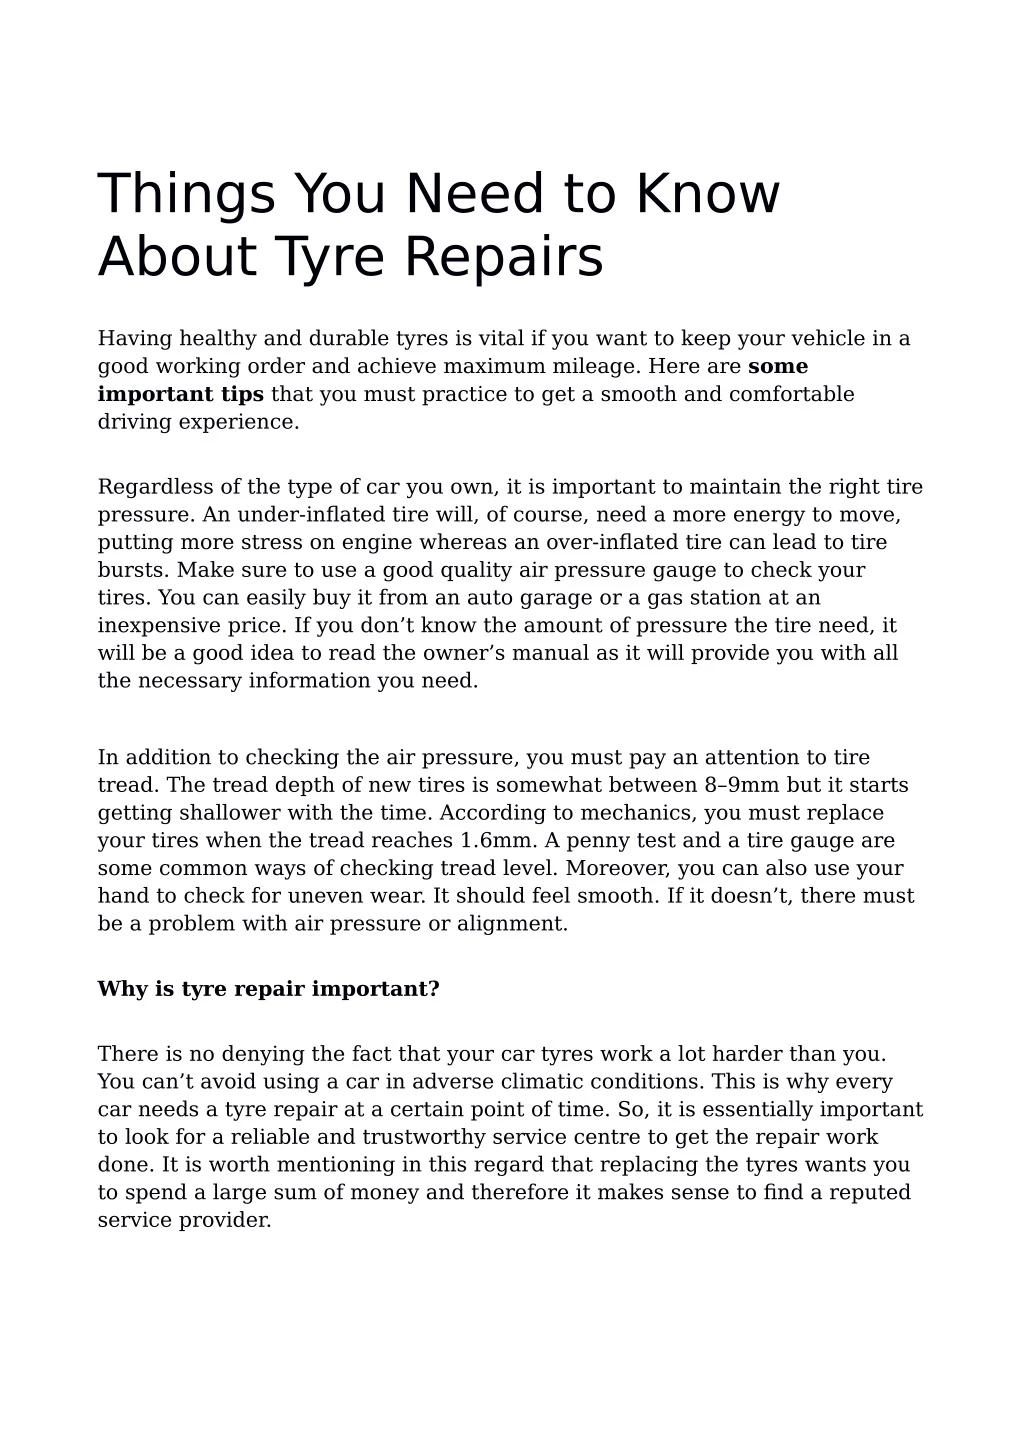 things you need to know about tyre repairs